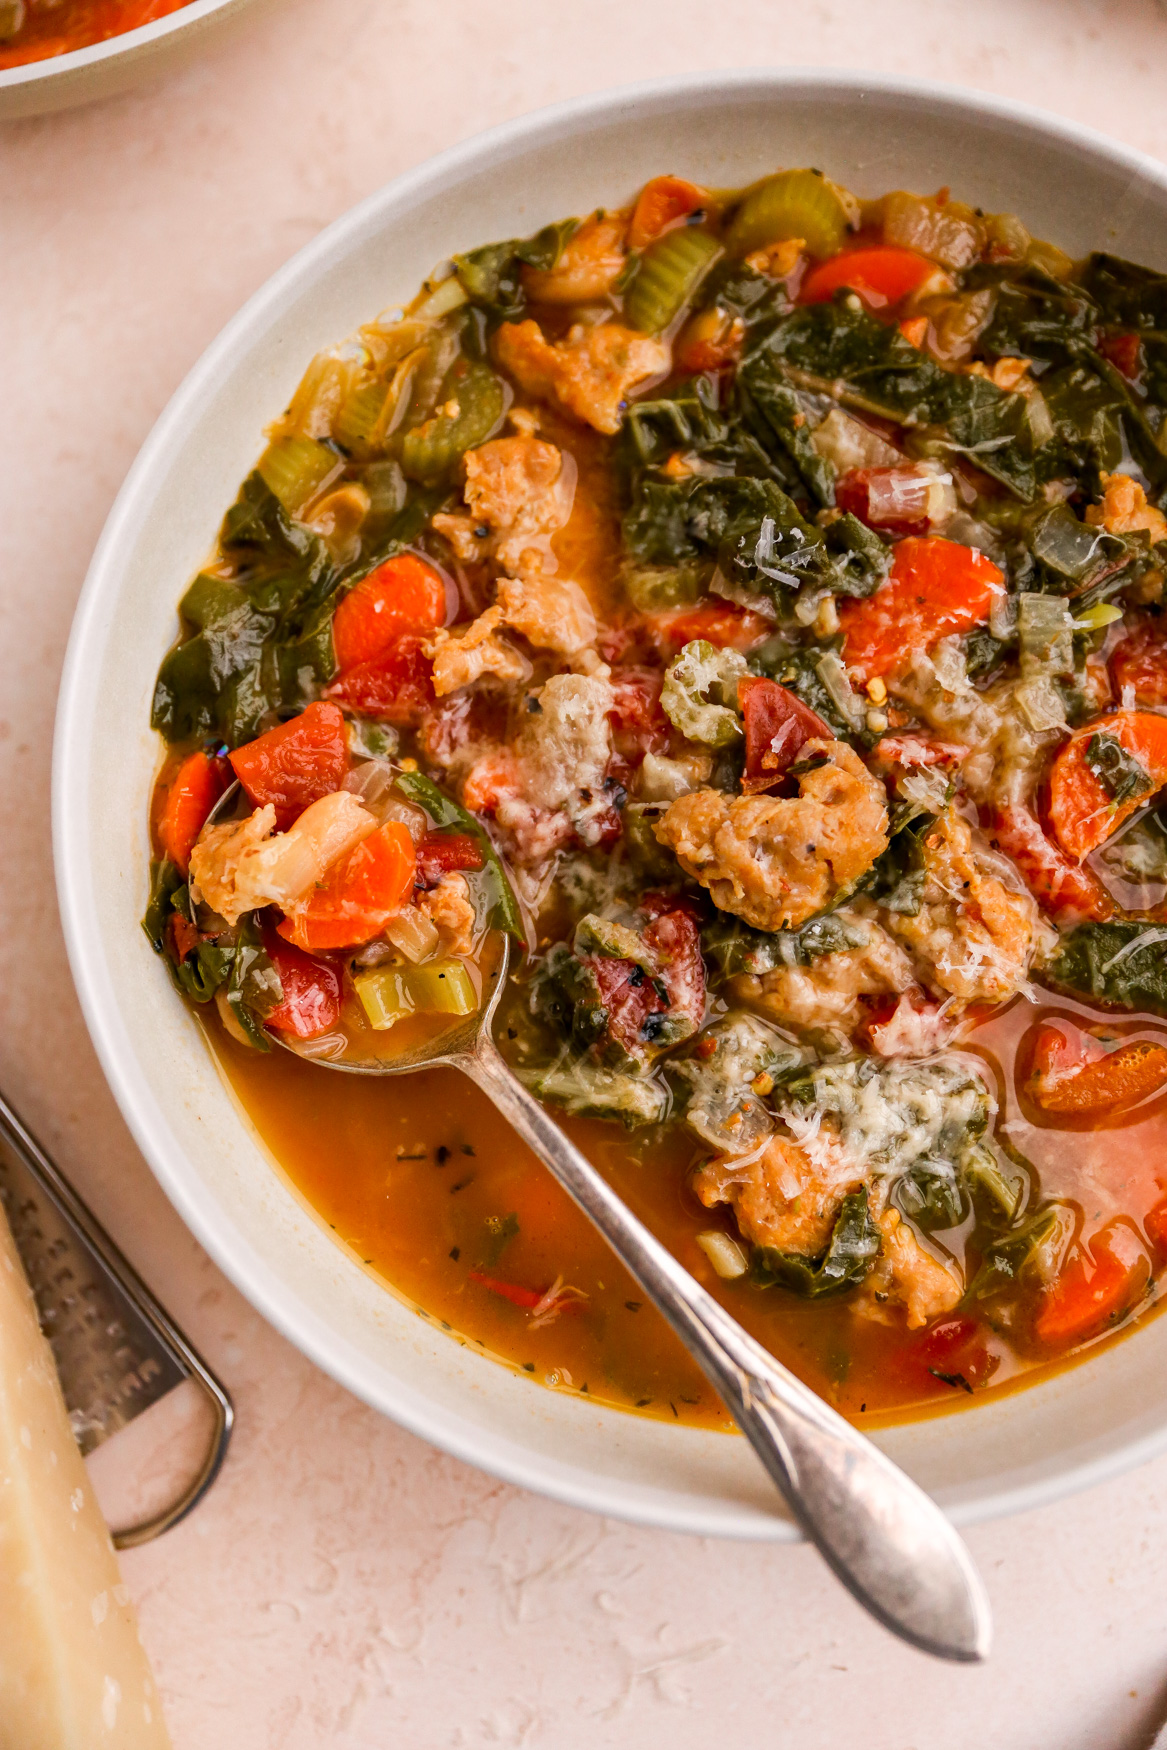 Chicken Sausage & Swiss Chard Soup - Yes to Yolks